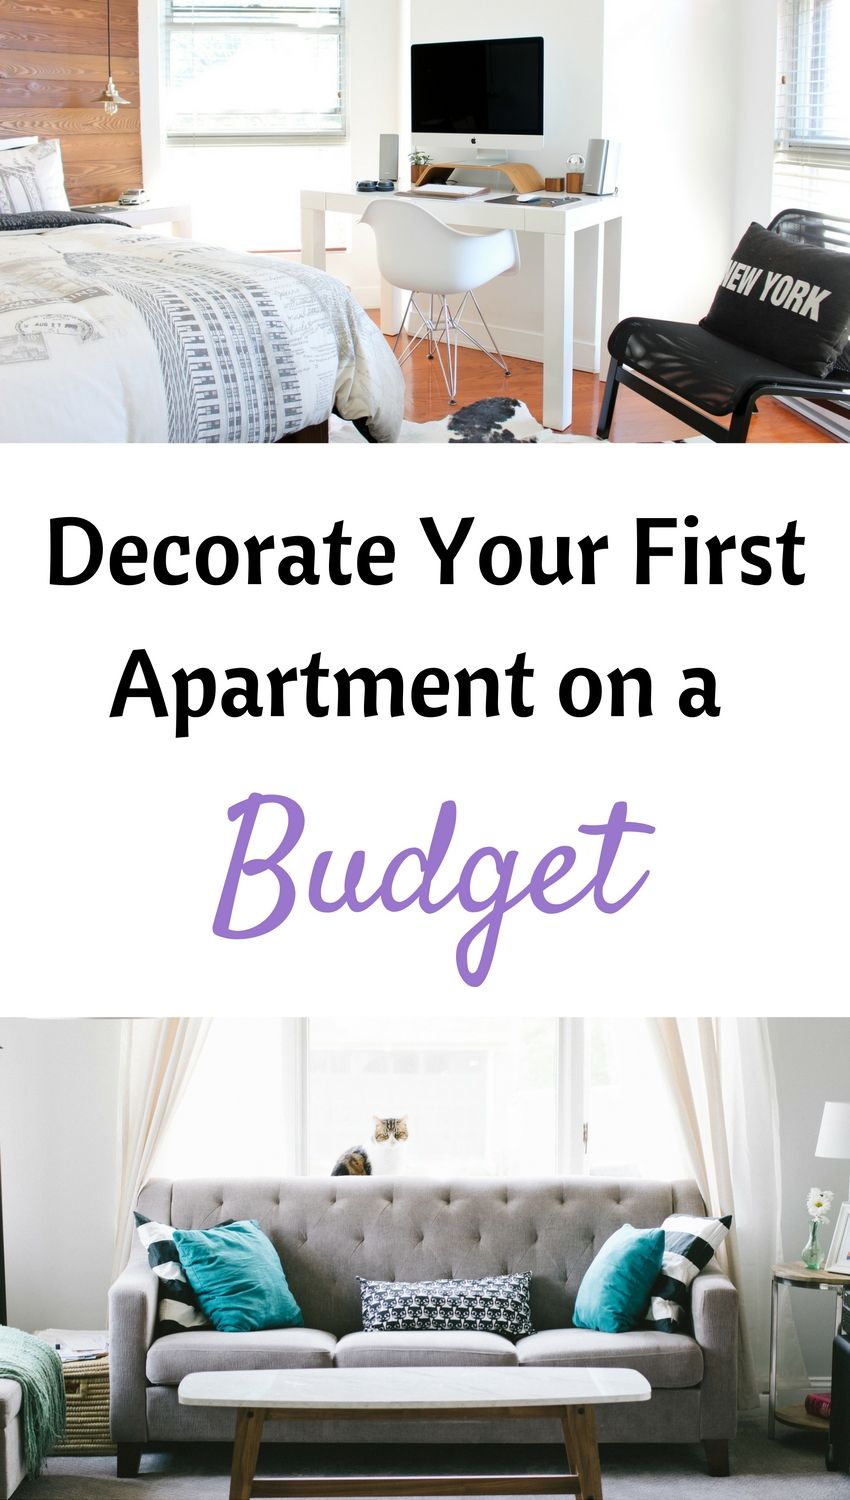 Decorate Your Apartment On a Budget